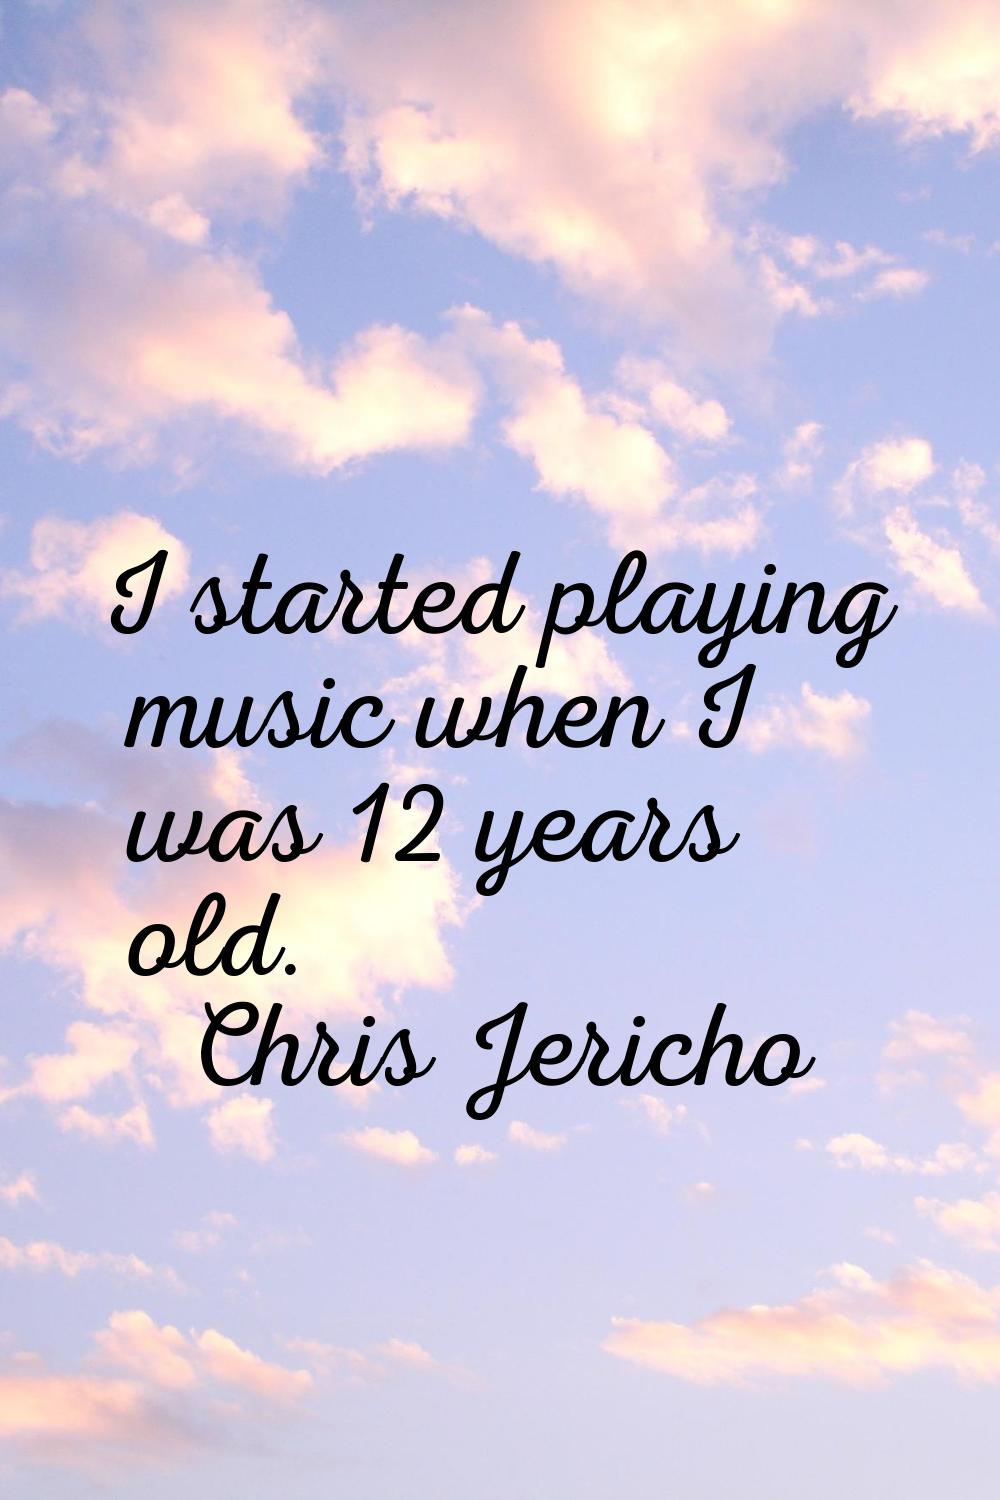 I started playing music when I was 12 years old.